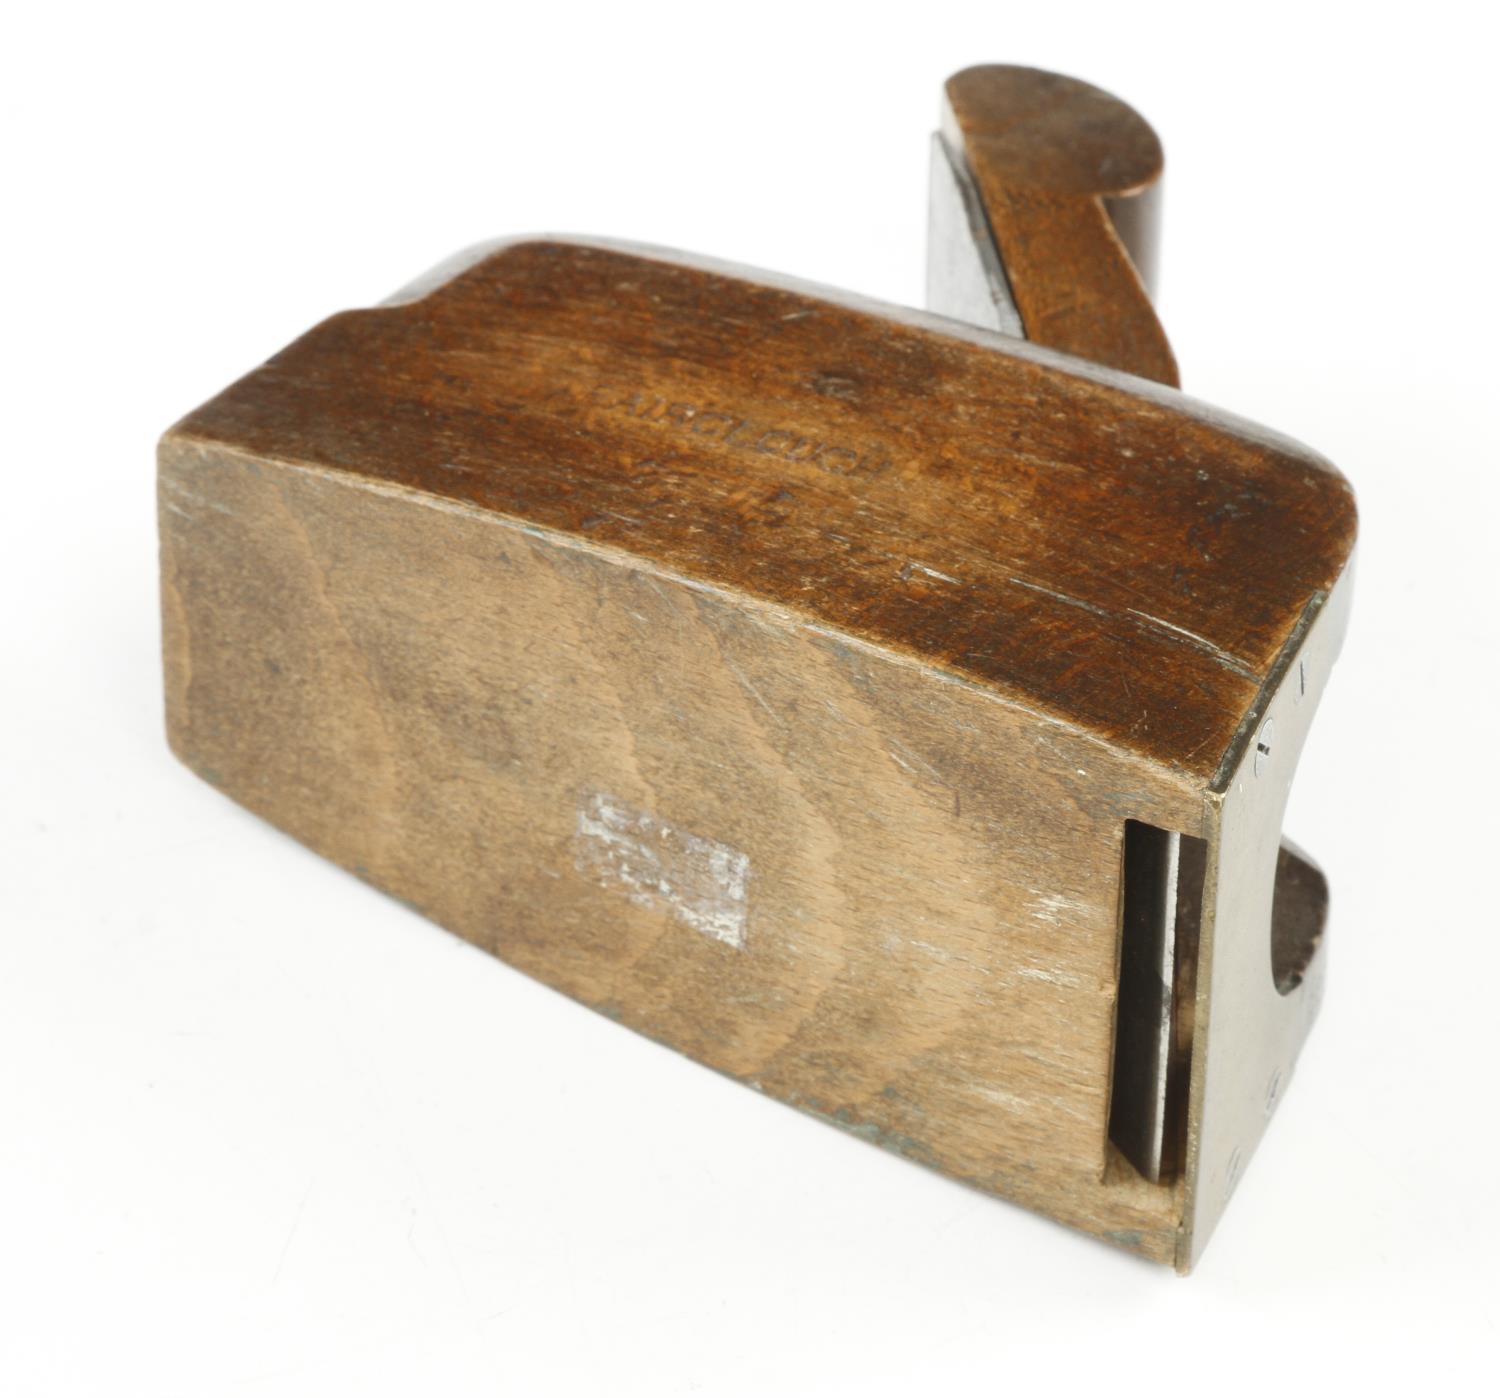 A beech bullnose plane by VARVILL with brass front and scrolled wedge 4 1/4" x 2" G+ - Image 3 of 3